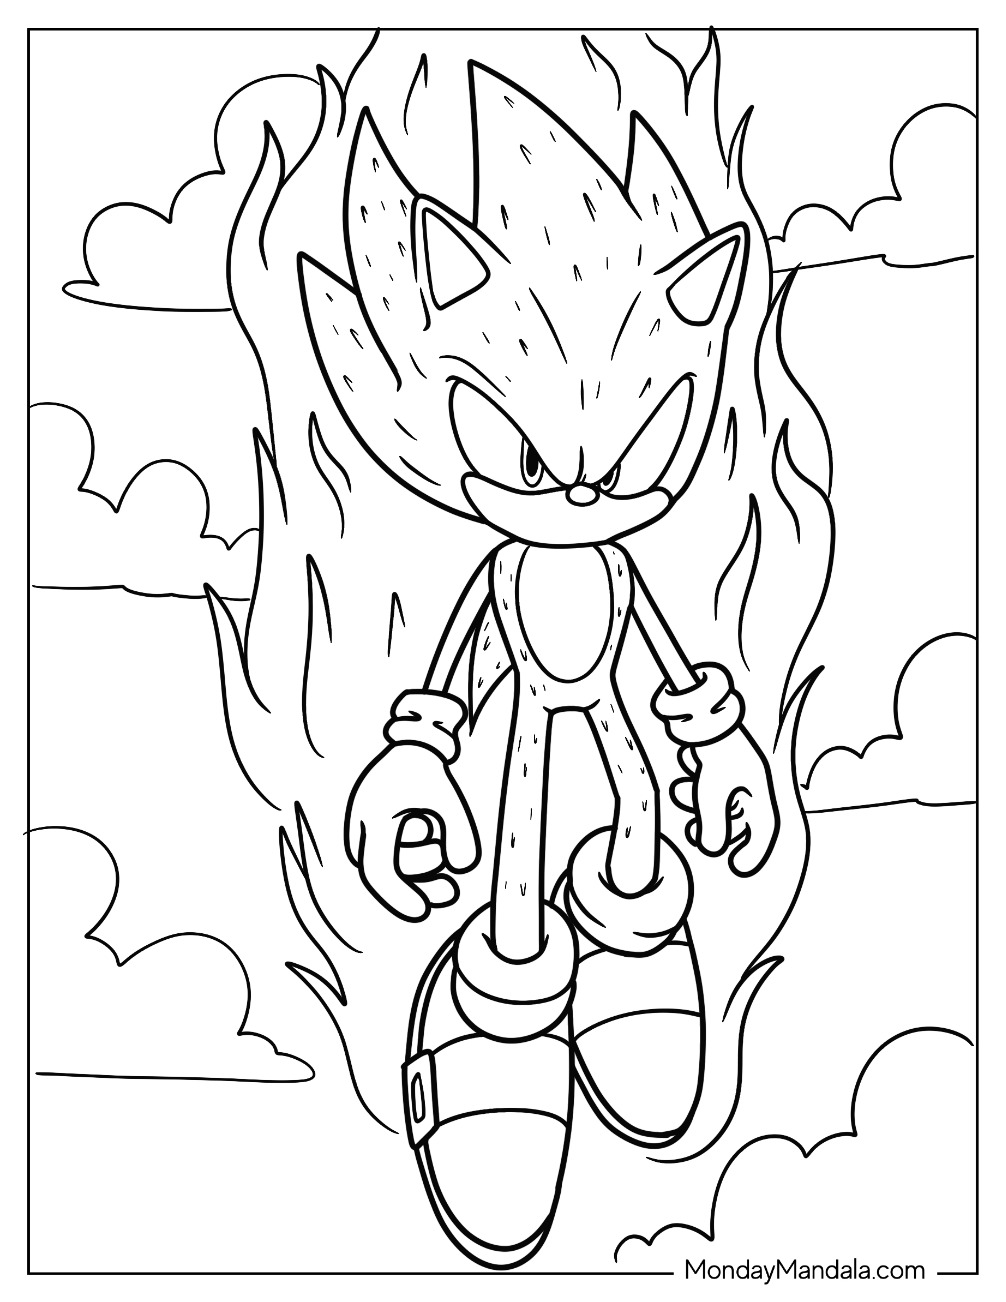 Super sonic coloring pages free pdf printables